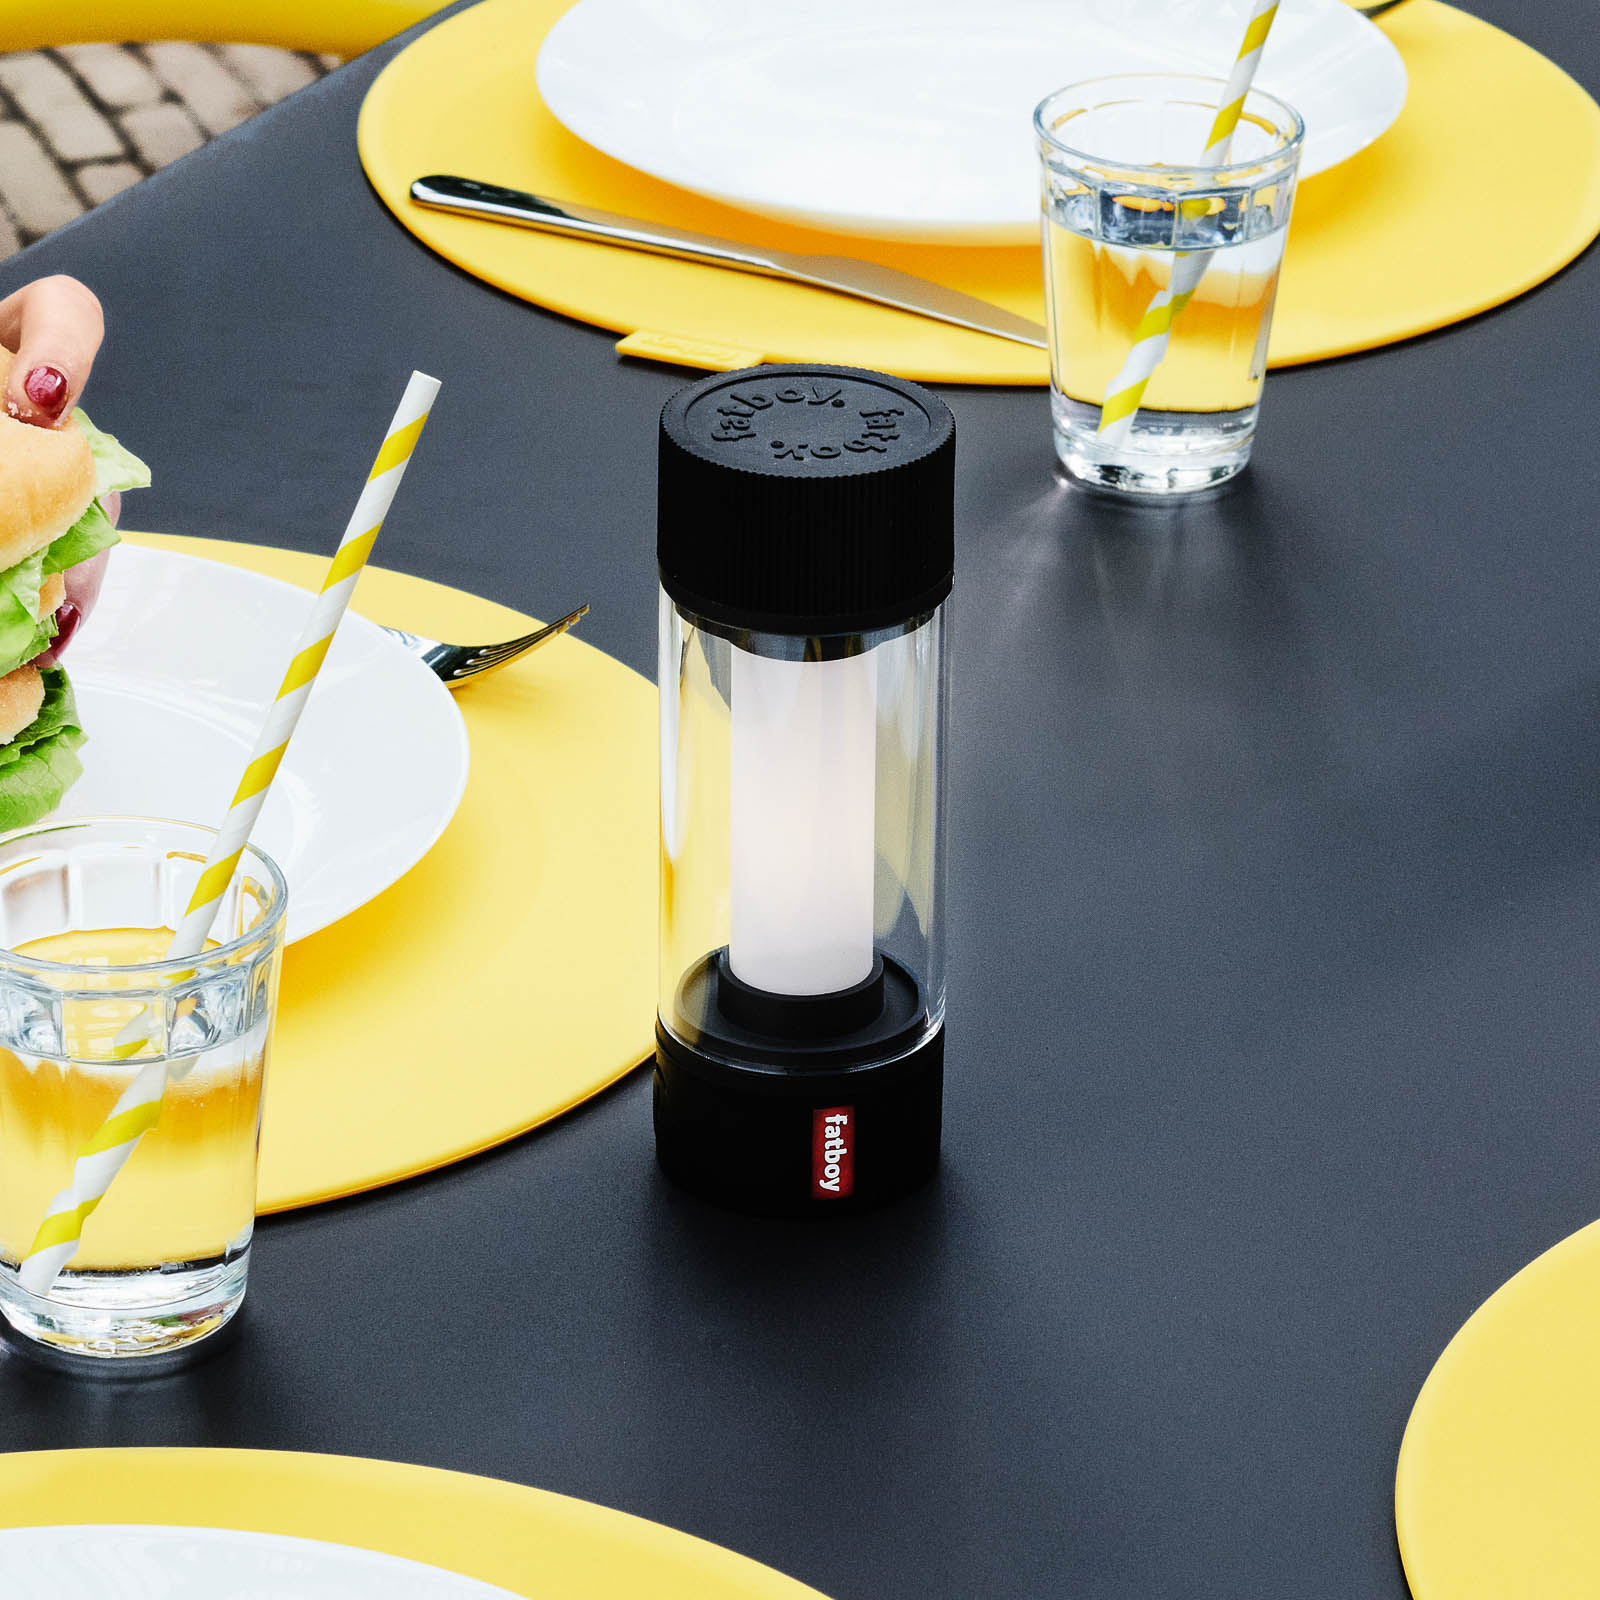 Fatboy lampe table LED Tjoepke batterie anthracite